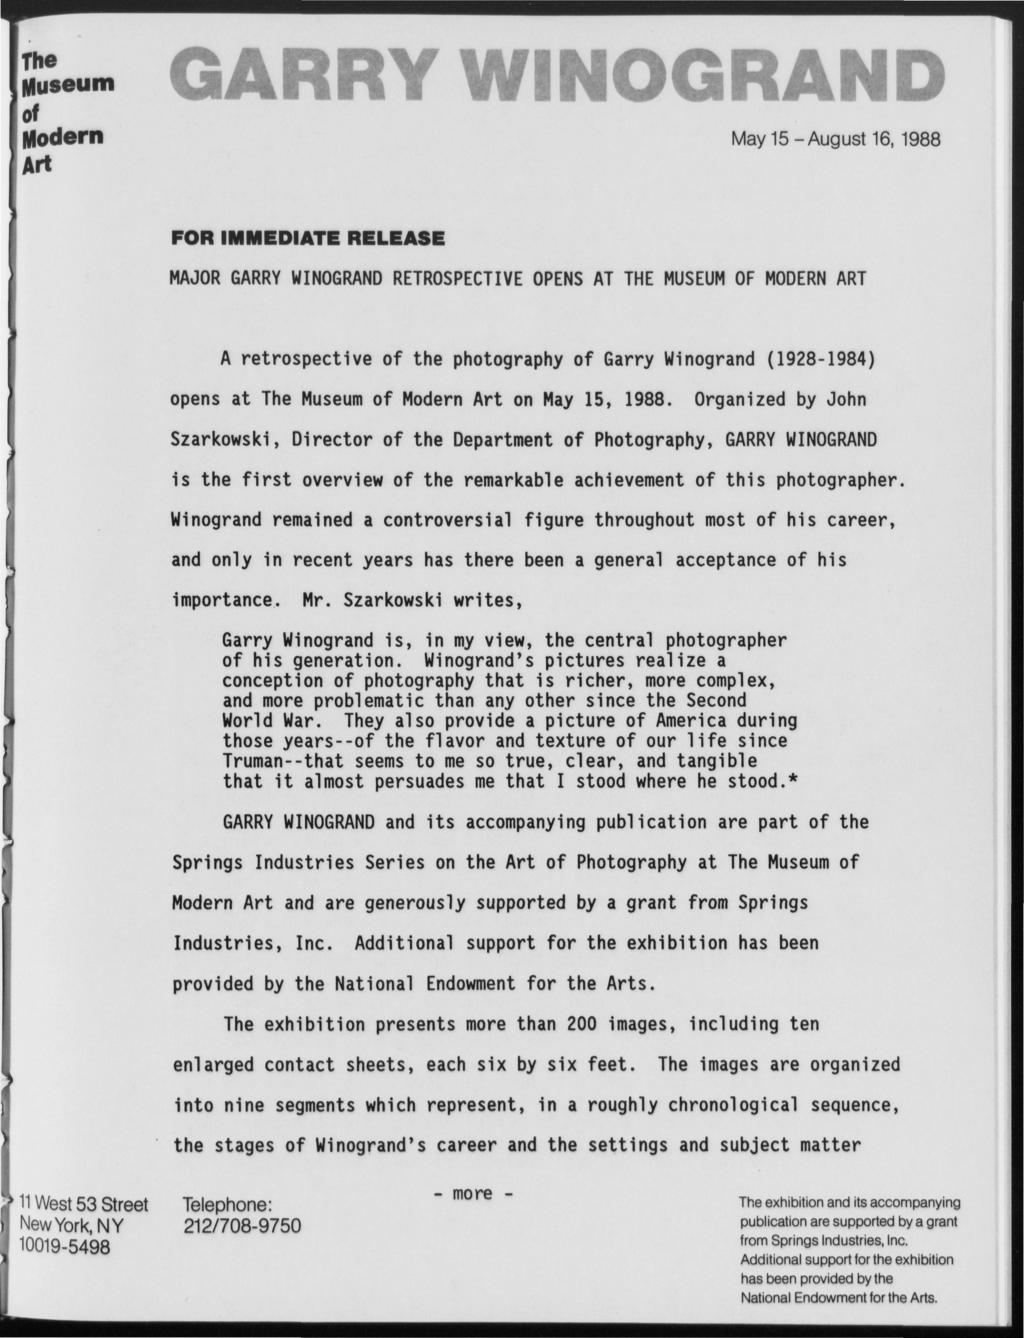 The Museum of Modern Art ^% y % BF^^kJF WMSi A ' ***,/":"1 I F% May 15 -August 16, 1988 FOR IMMEDIATE RELEASE MAJOR GARRY WINOGRAND RETROSPECTIVE OPENS AT THE MUSEUM OF MODERN ART A retrospective of